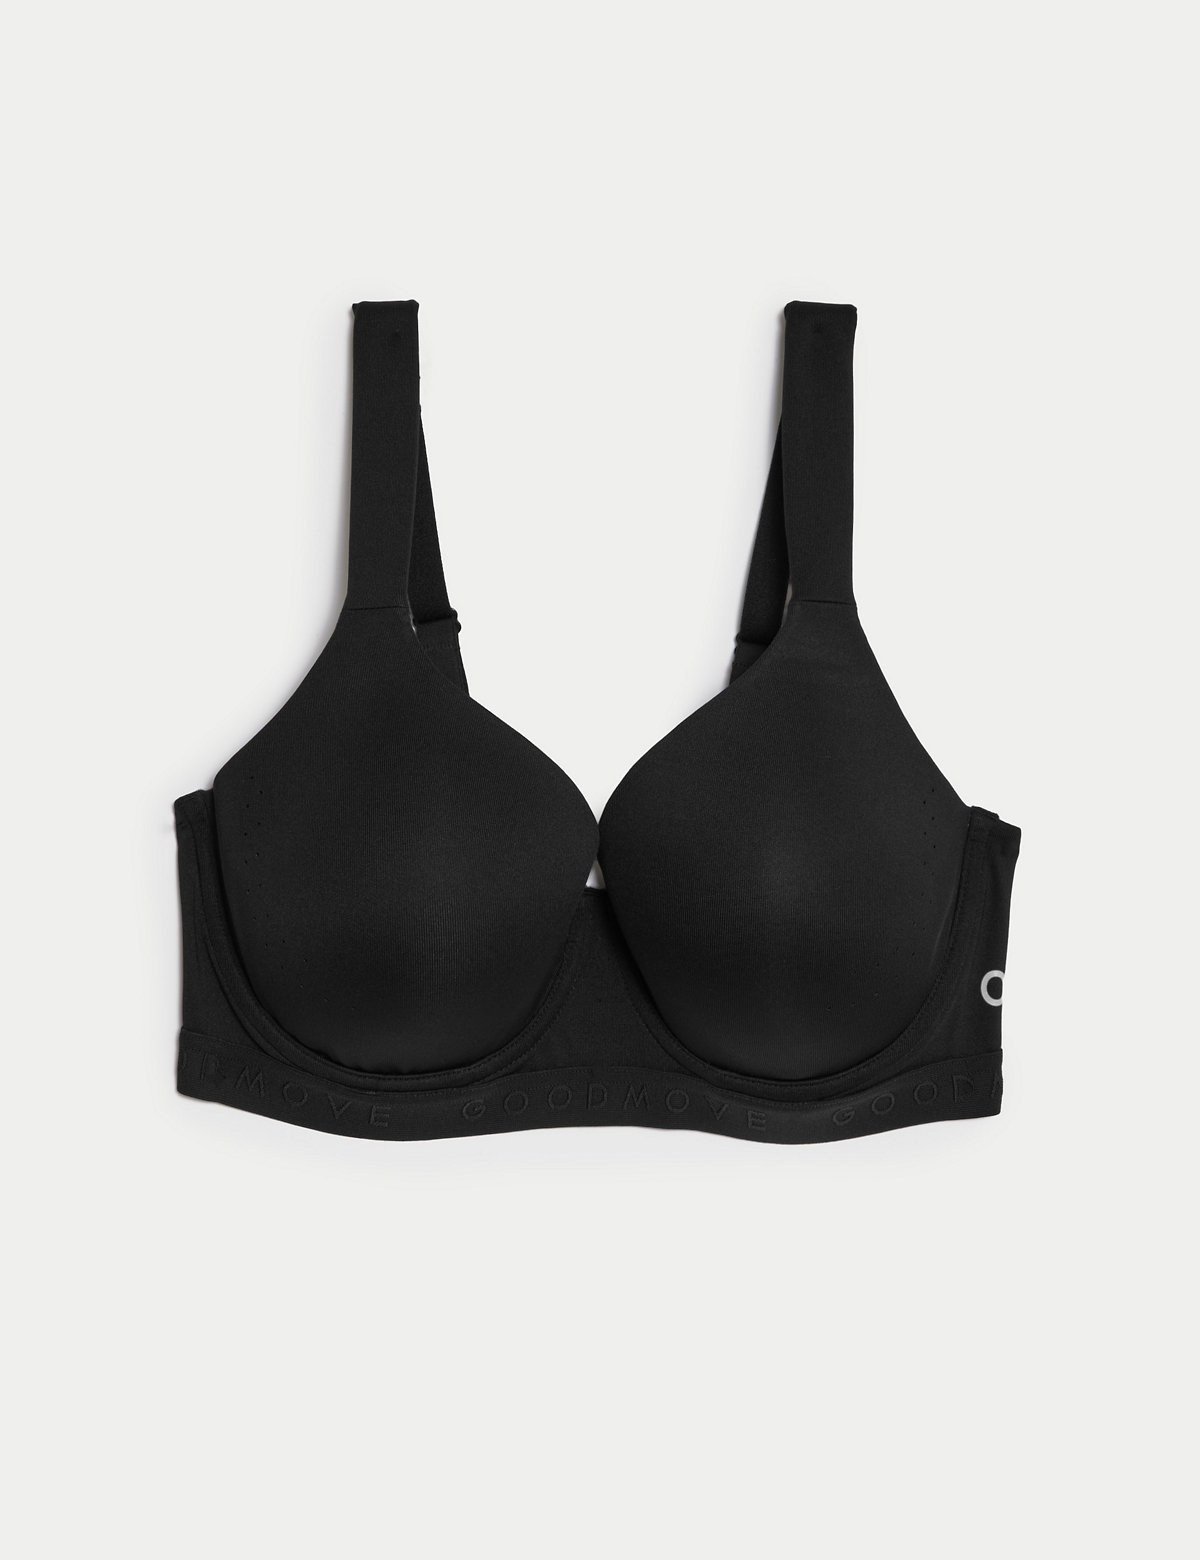 Ultimate Support Wired Sports T-shirt Bra A-E